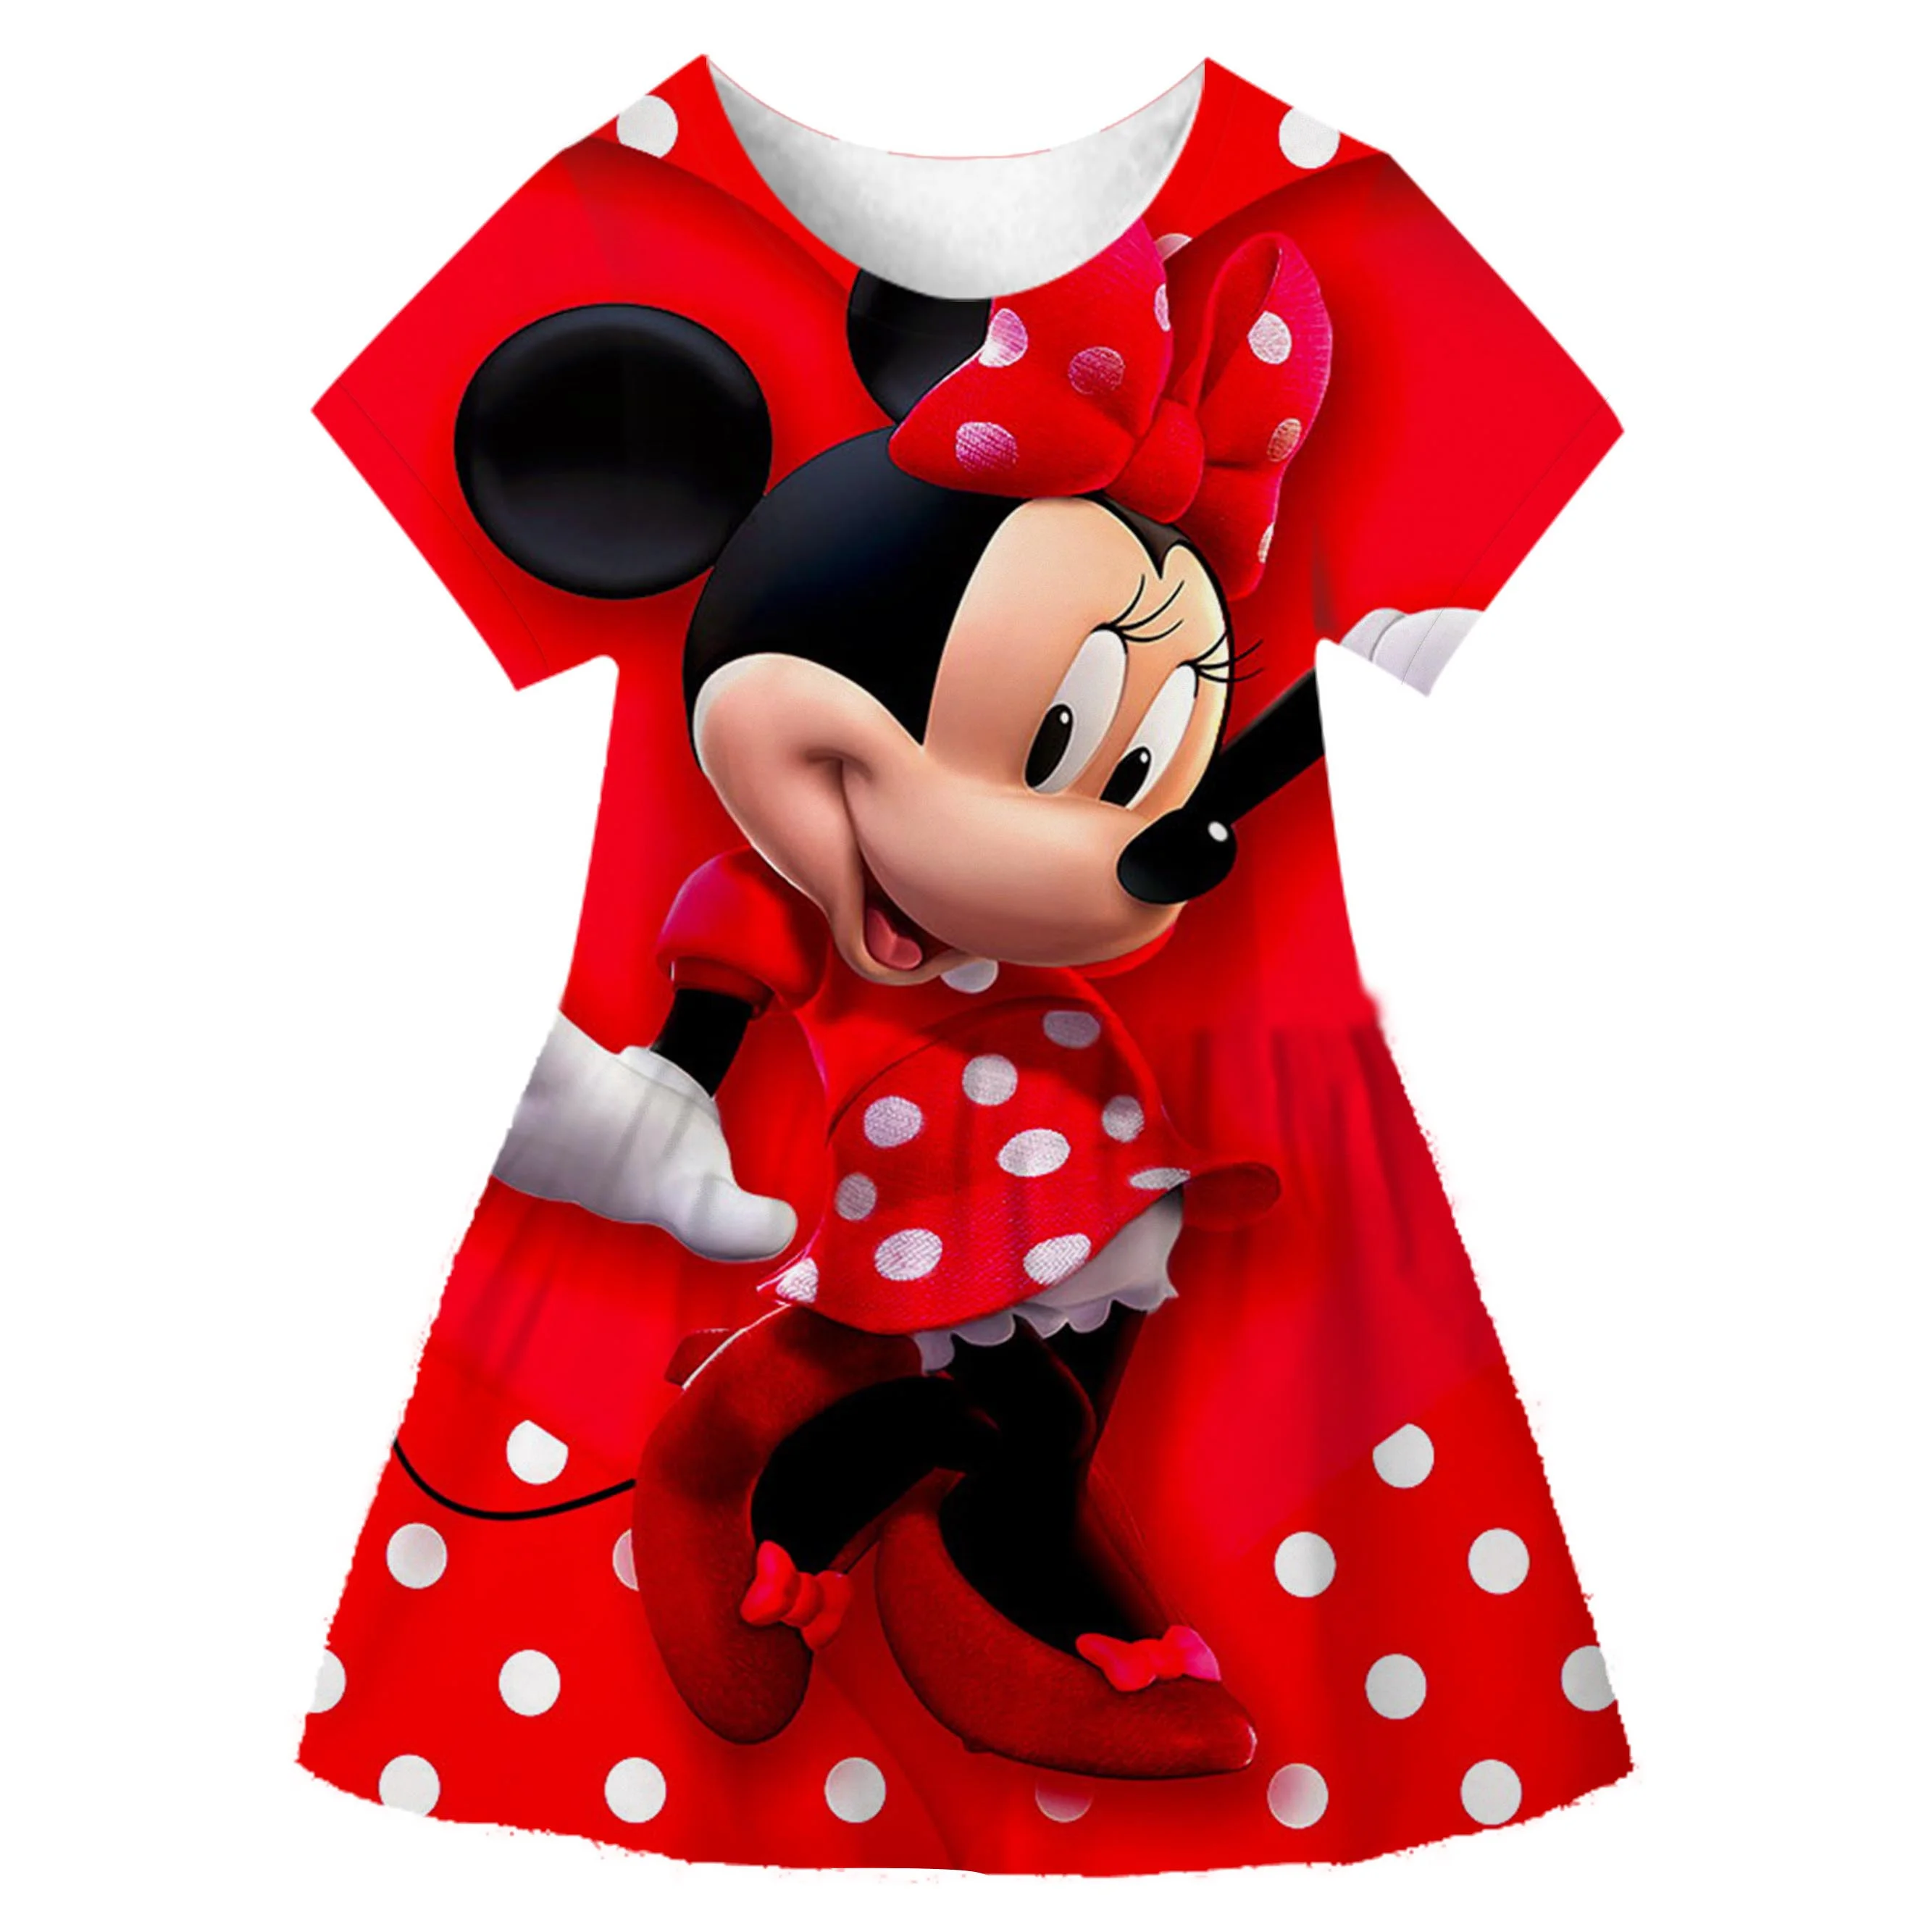 

Summer Kids Minnie Mouse Dresses for Girls Disney Series Costumes Frozen Stitch Encanto Cartoon Casual Party Frocks 1-10 Years